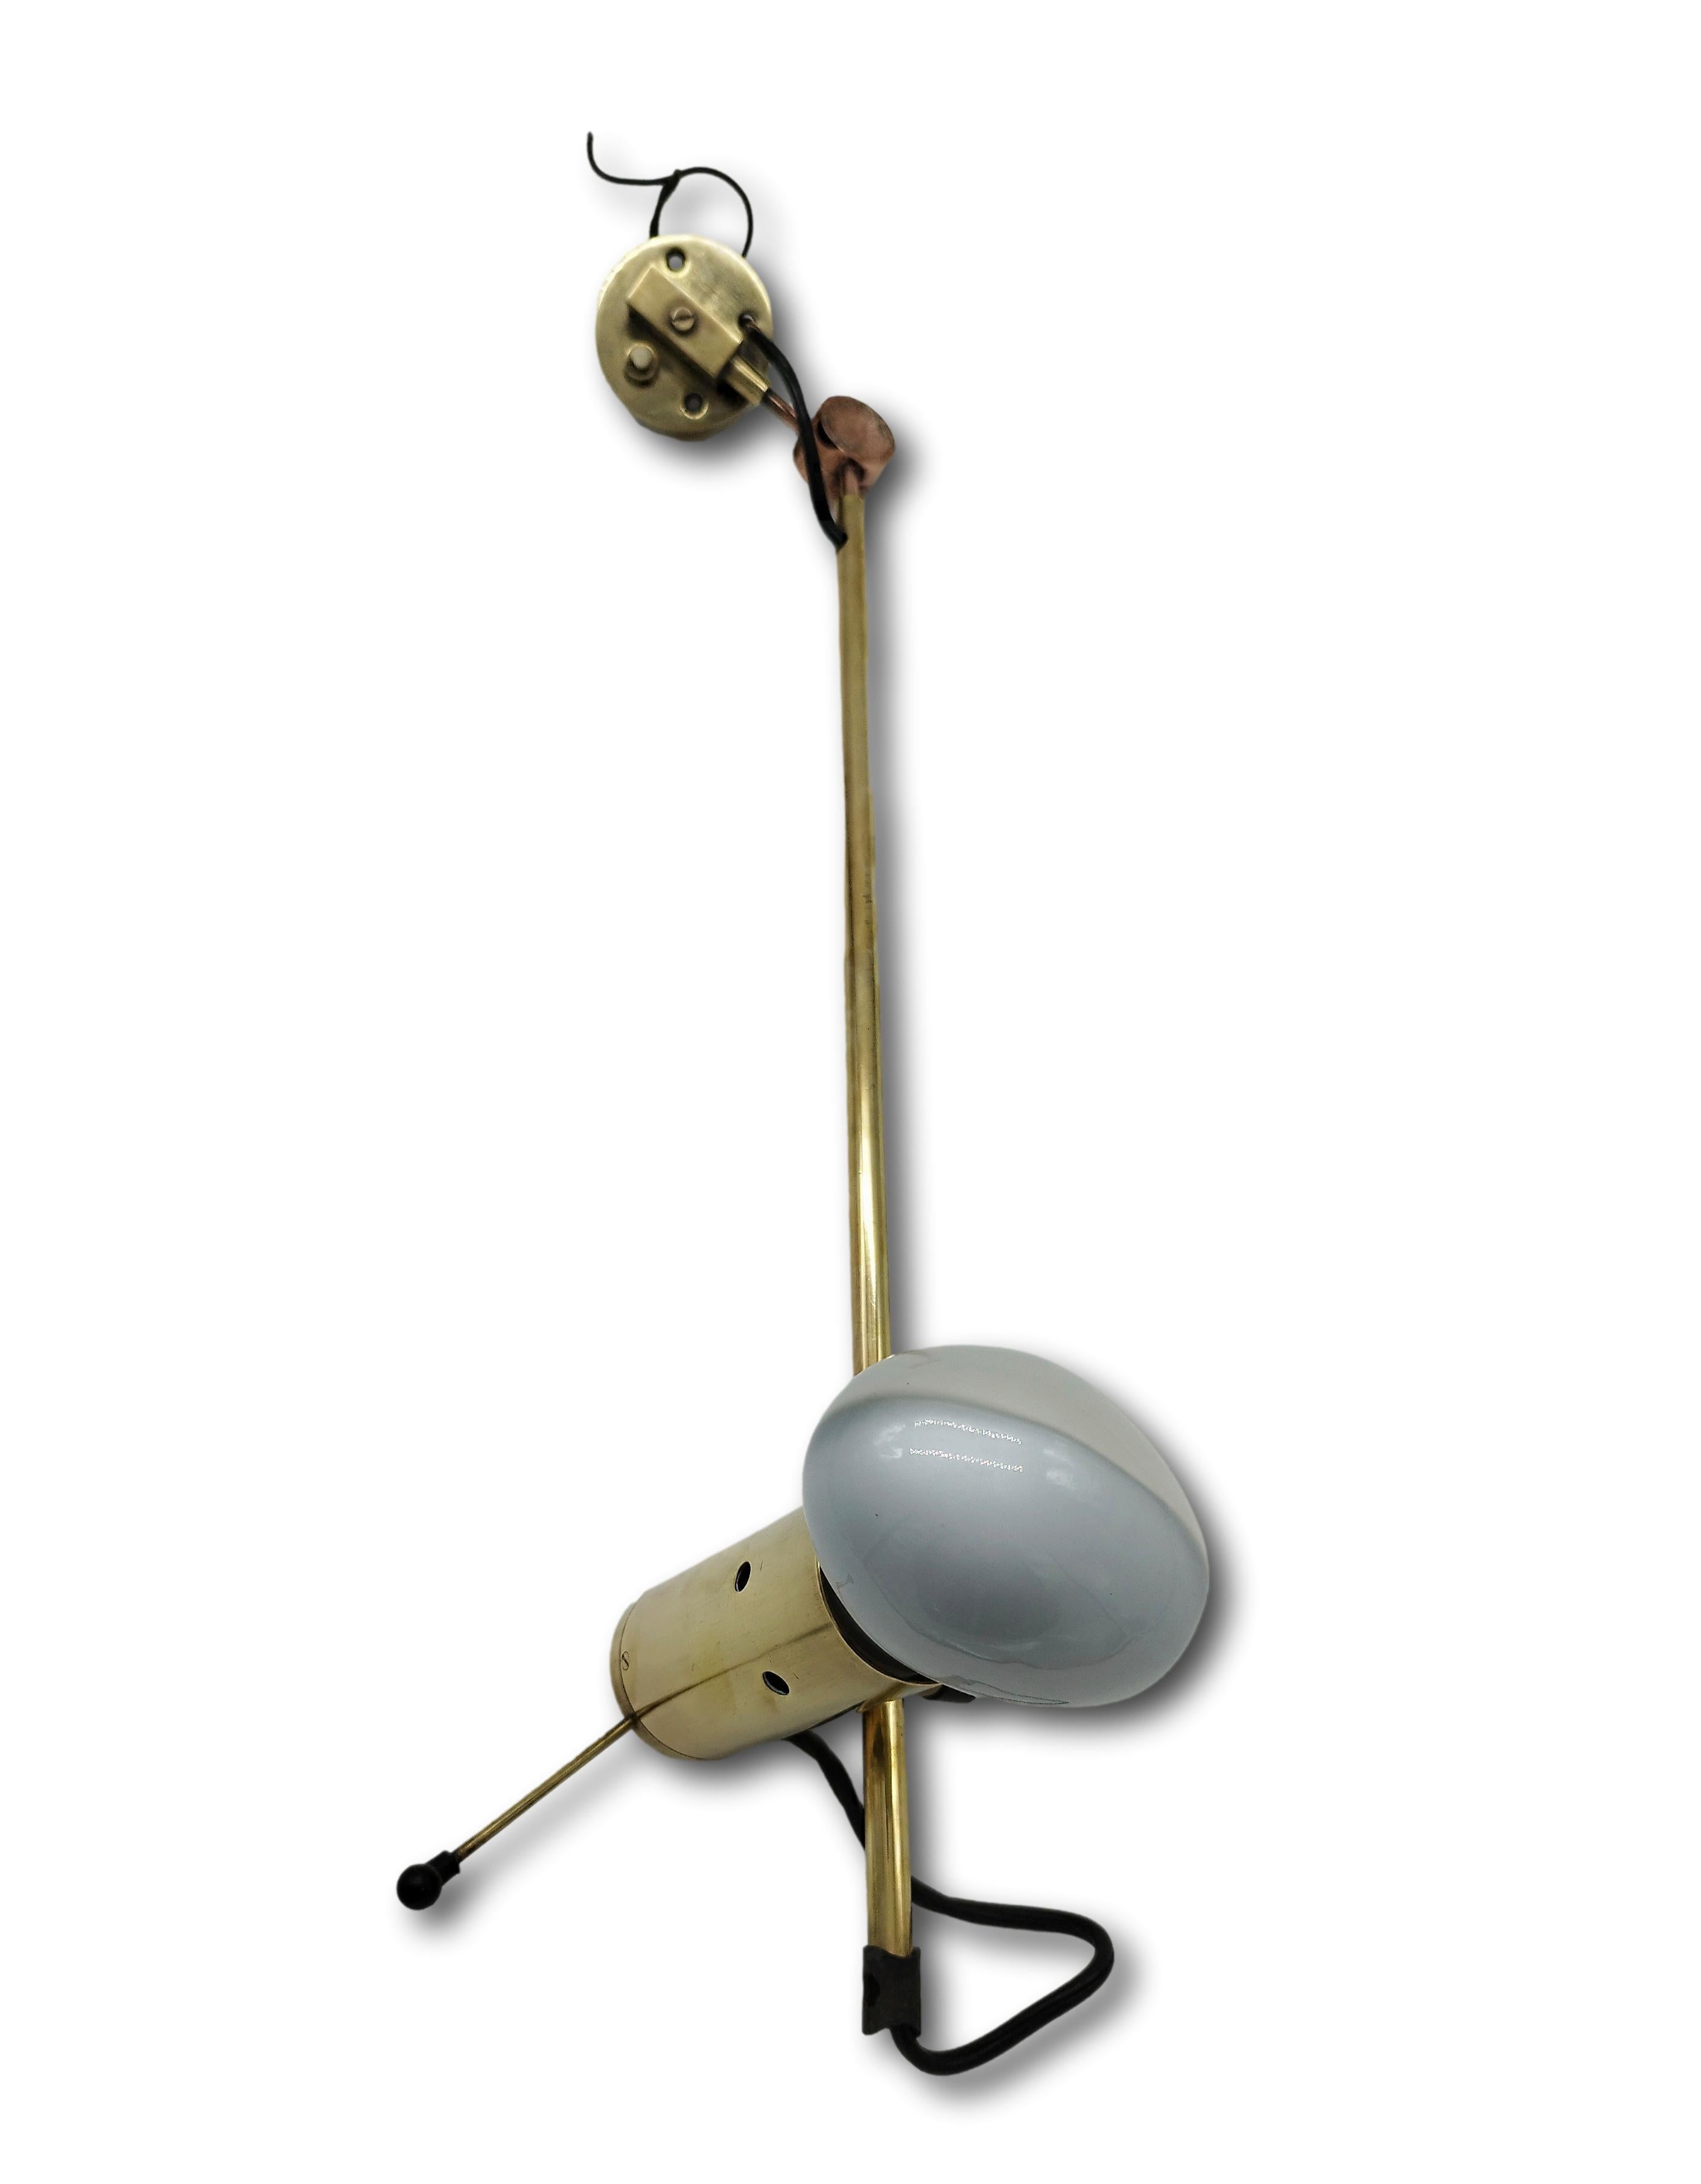 The Model 194 wall lamp is a rare piece by Tito Agnoli for Oluce, Italy 1954. It is a first edition, with arms and fittings made entirely of brass and an original Cornalux 'hammerhead' bulb. This design stands out for its versatility thanks to its